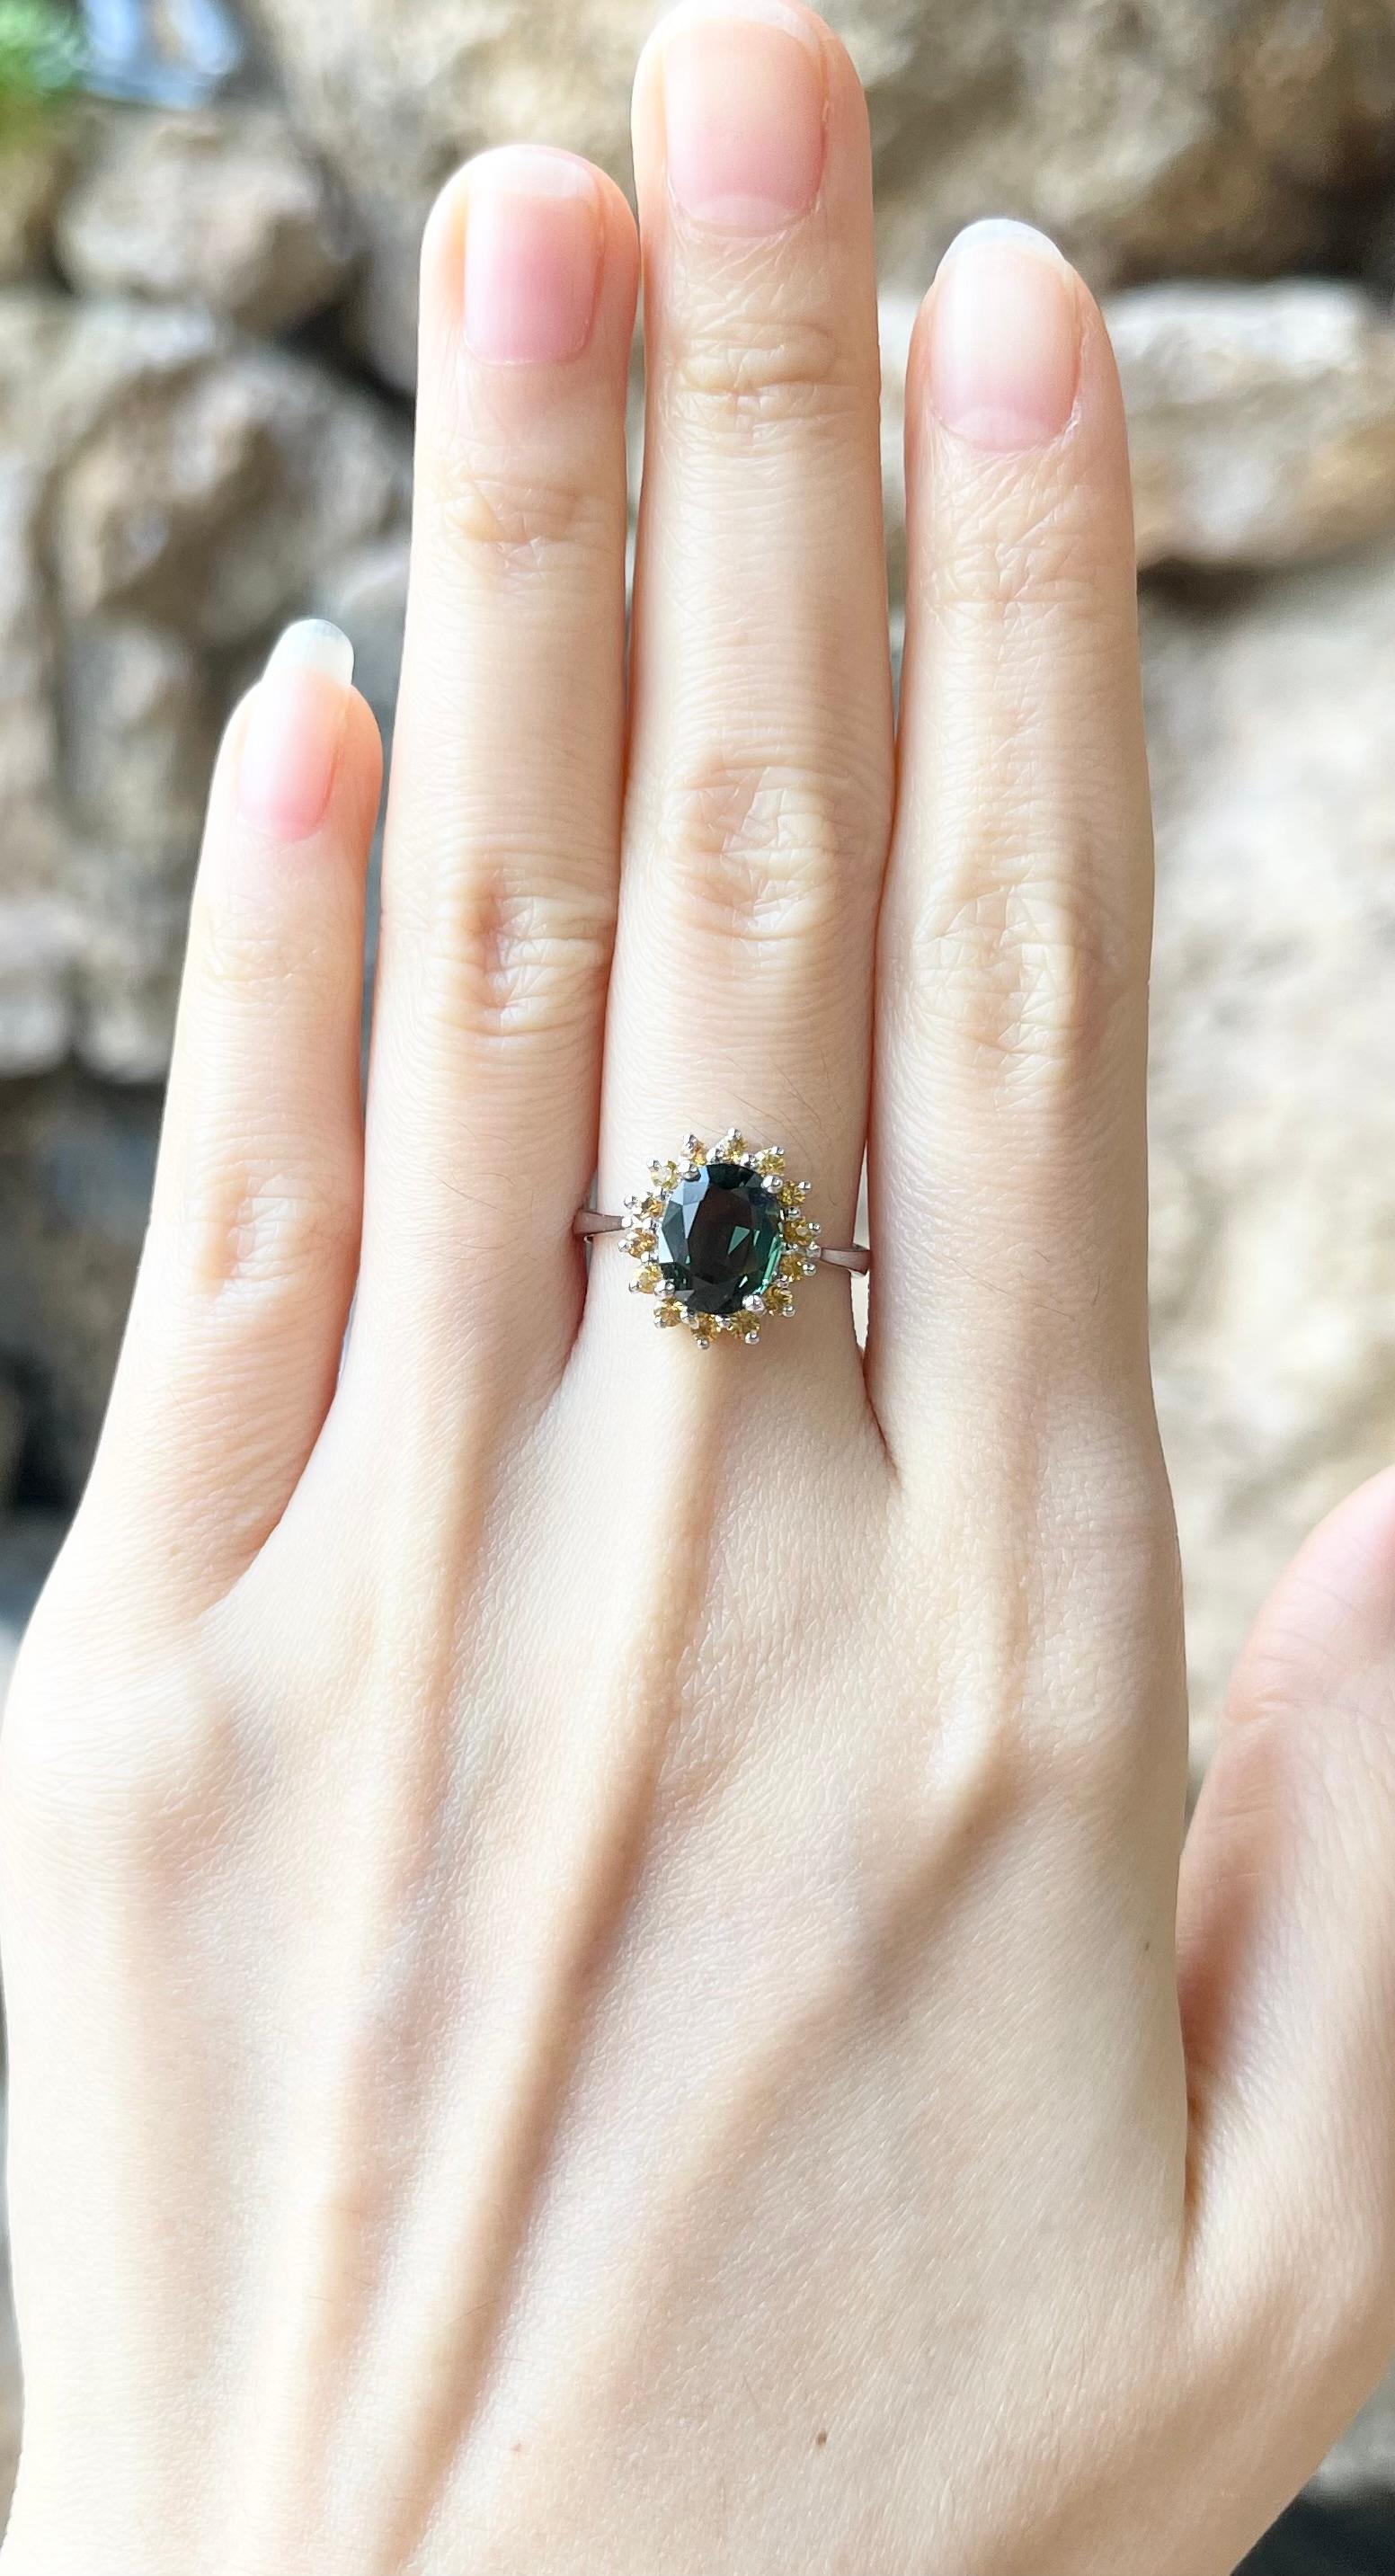 Green Sapphire 2.33 carats with Yellow Sapphire 0.46 carat Ring set in 14K White Gold Settings

Width:  1.2 cm 
Length: 1.4 cm
Ring Size: 53
Total Weight: 4.00 grams

